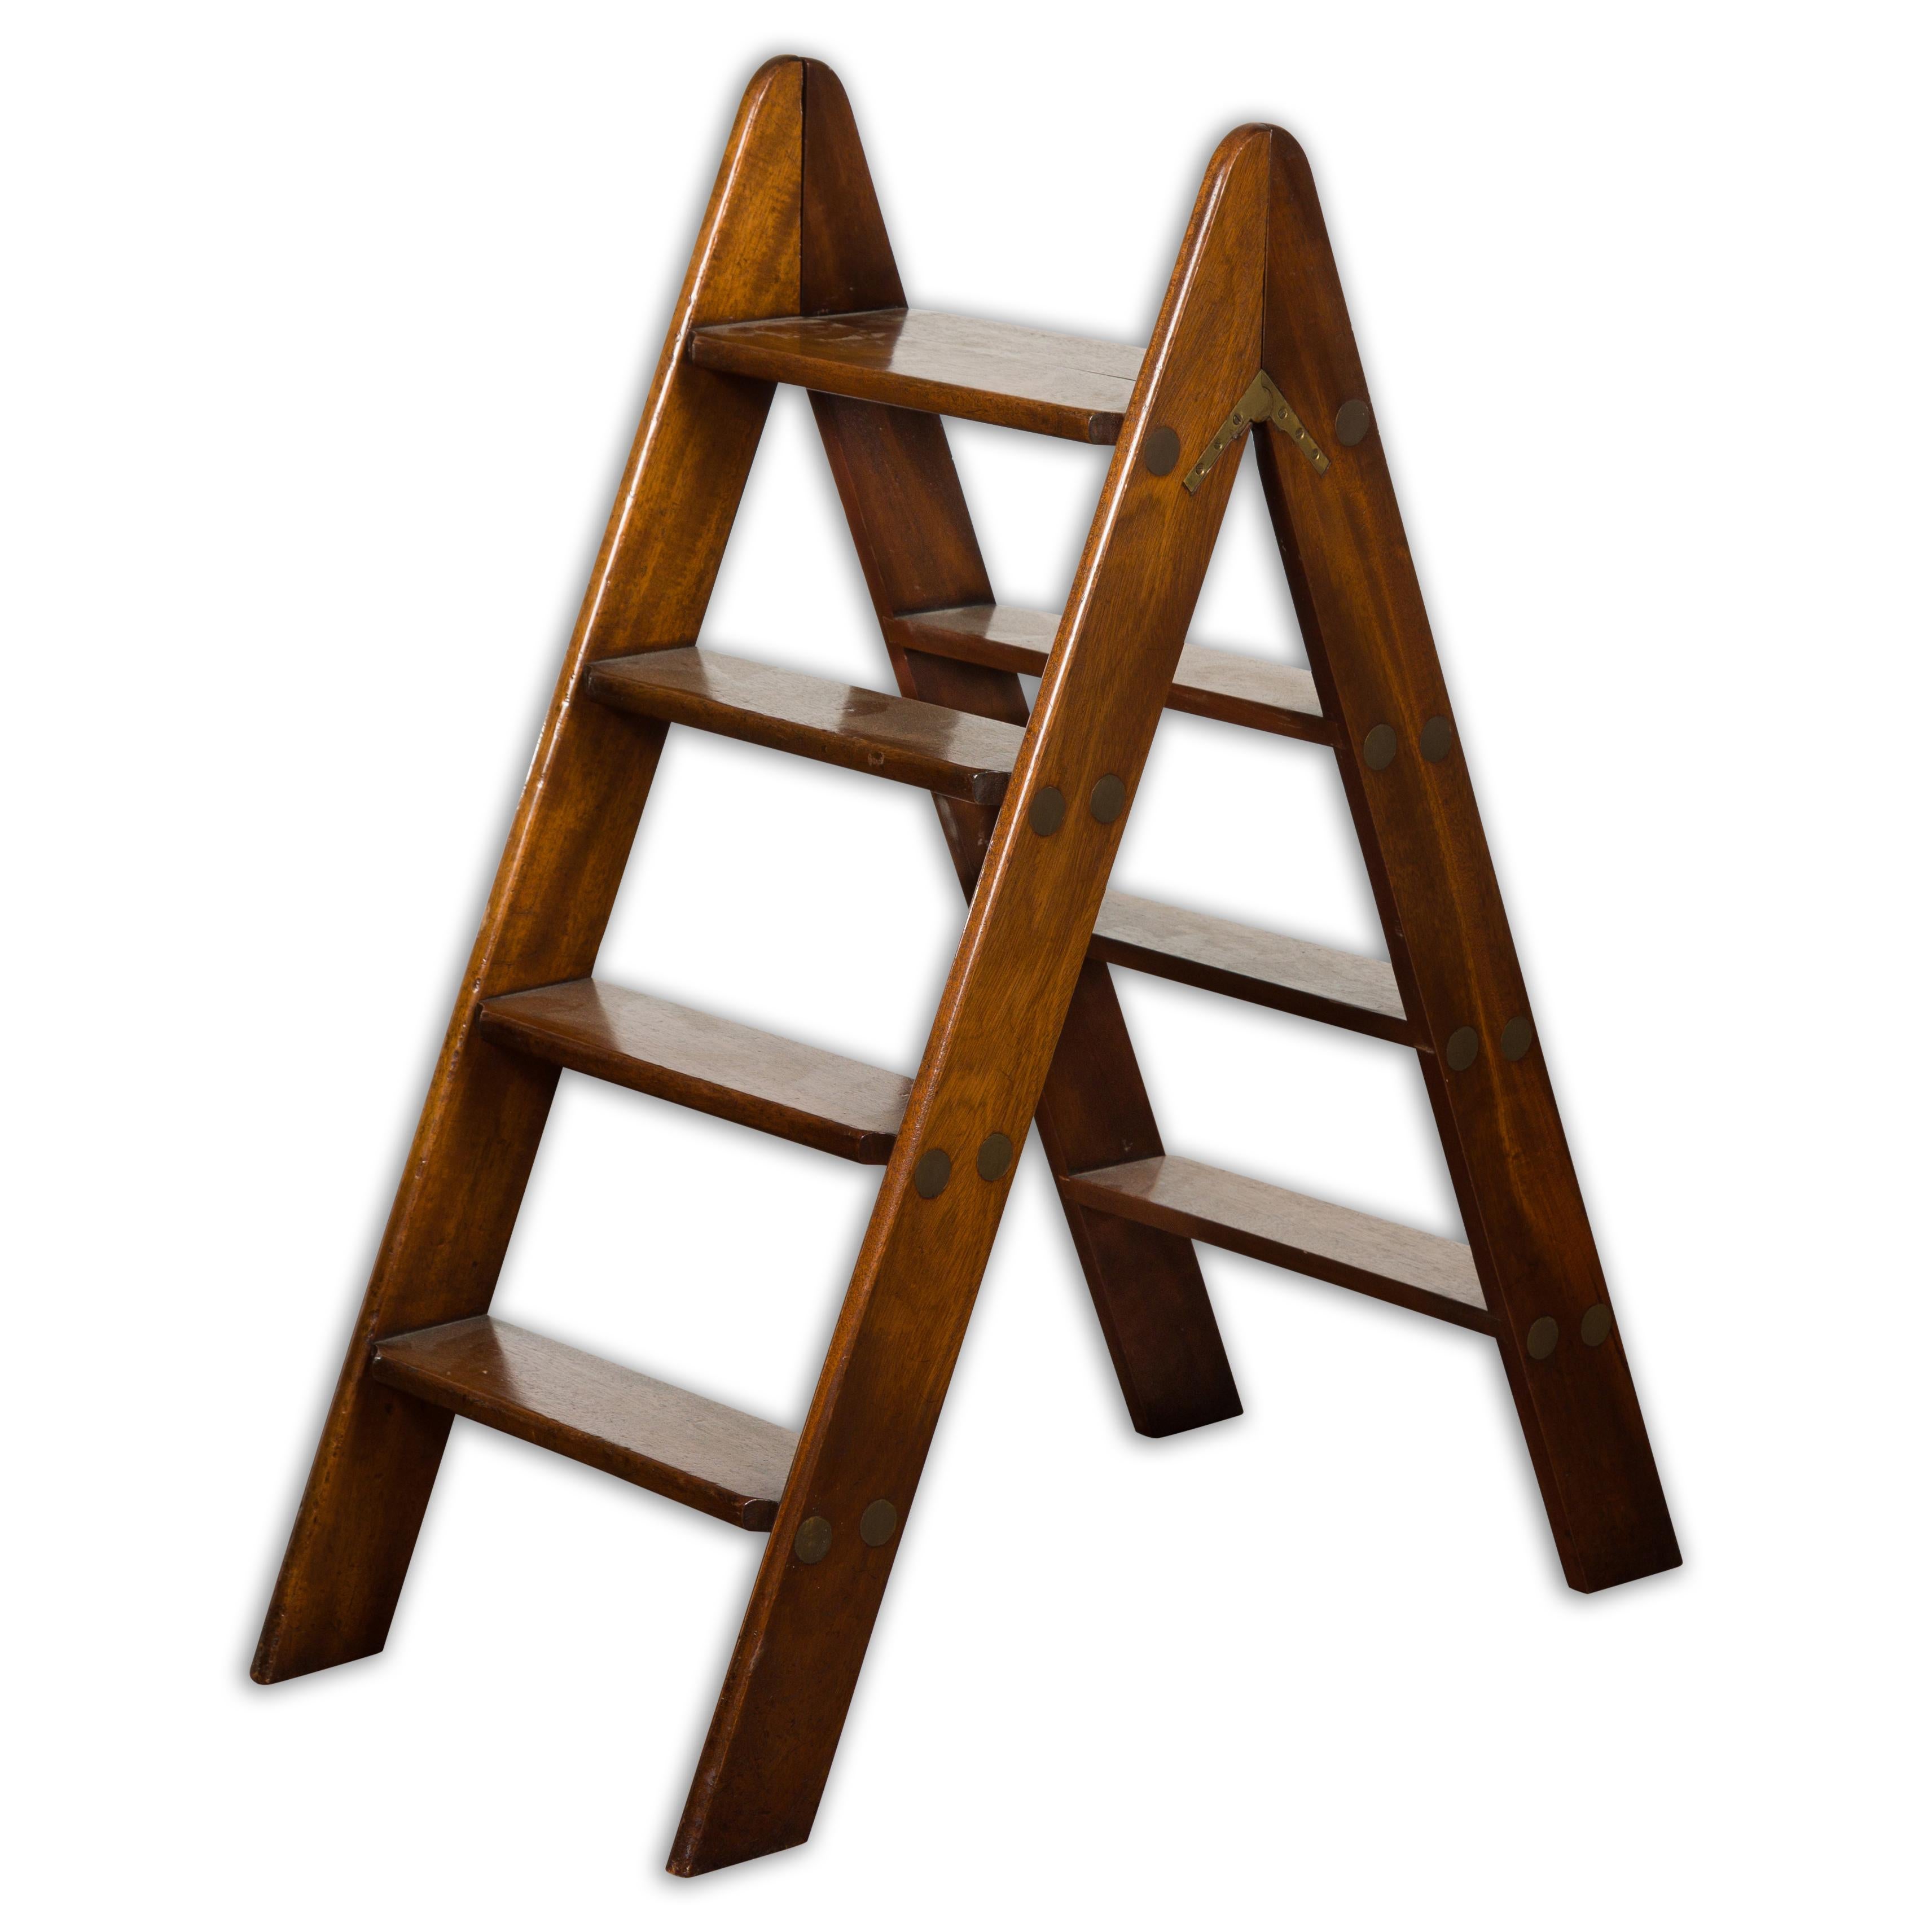 An English oak step library ladder from the 19th century. Step into the pages of history with this 19th-century English oak library ladder, a mix of utilitarian function and classic charm. Crafted from robust oak, this library ladder exudes an